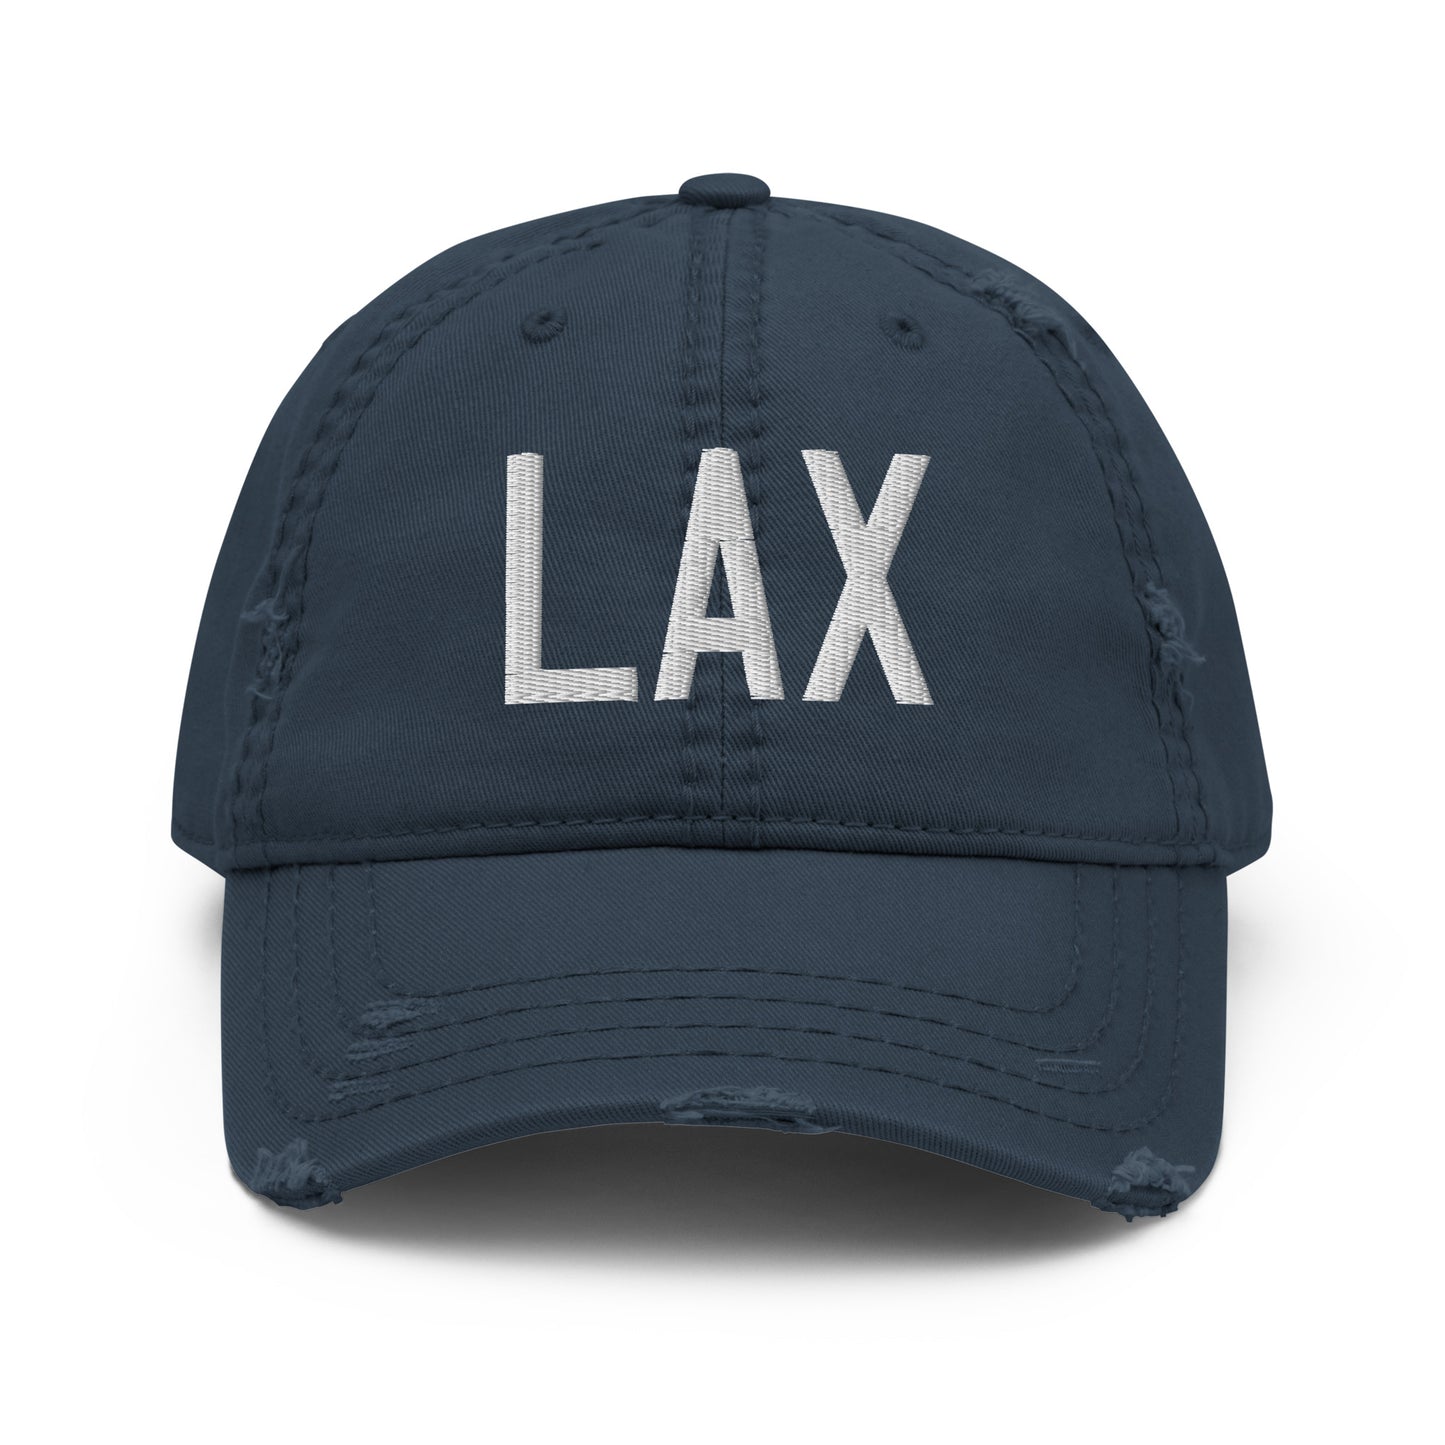 Airport Code Distressed Hat - White • LAX Los Angeles • YHM Designs - Image 13